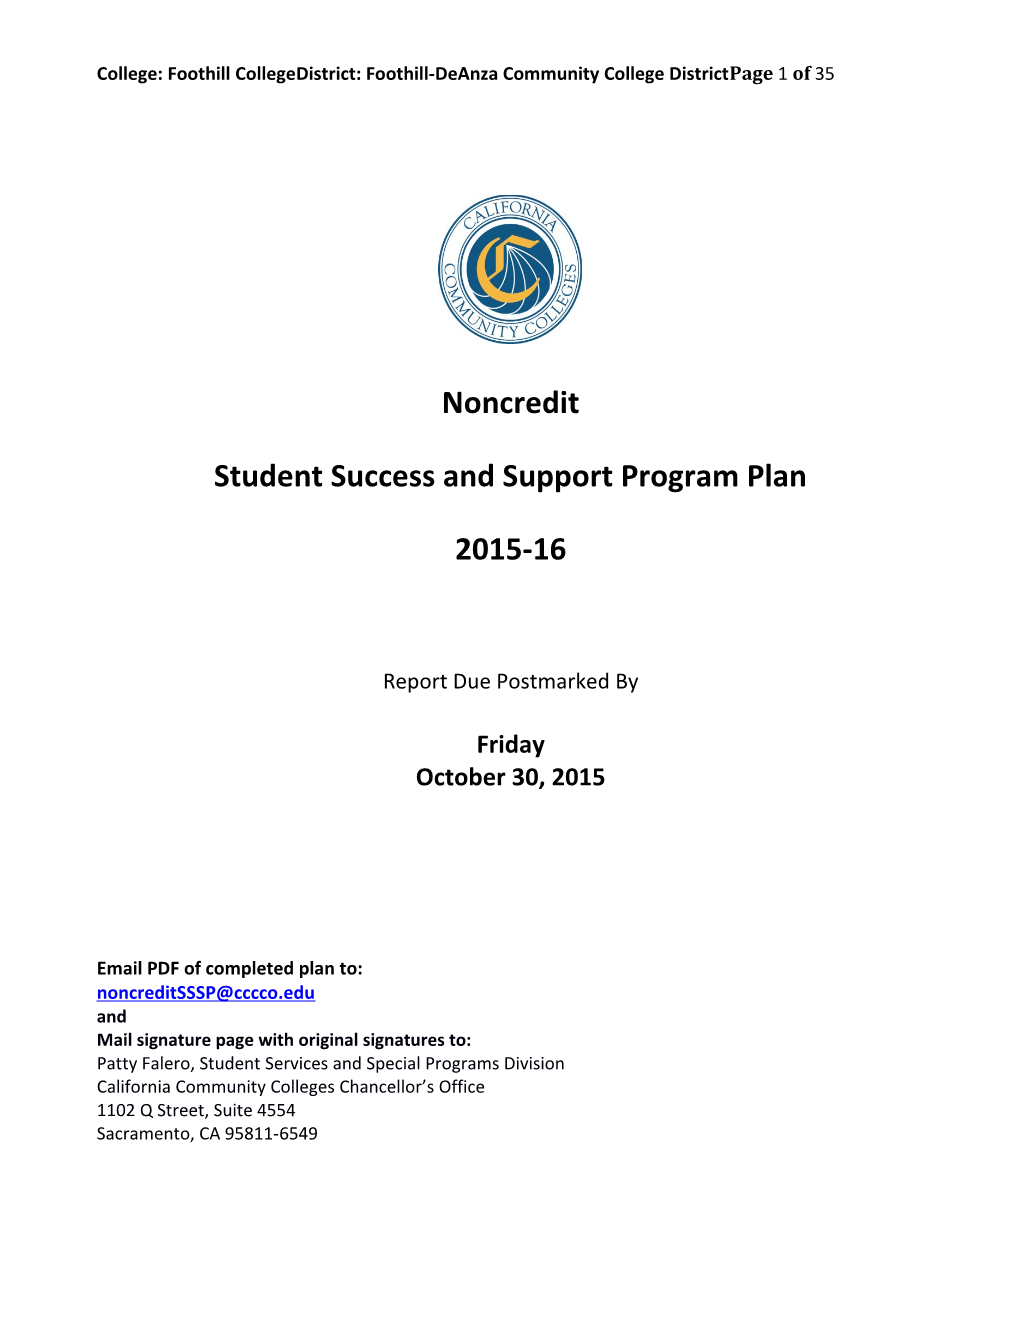 The Student Success and Support Program Plan (Credit Students)